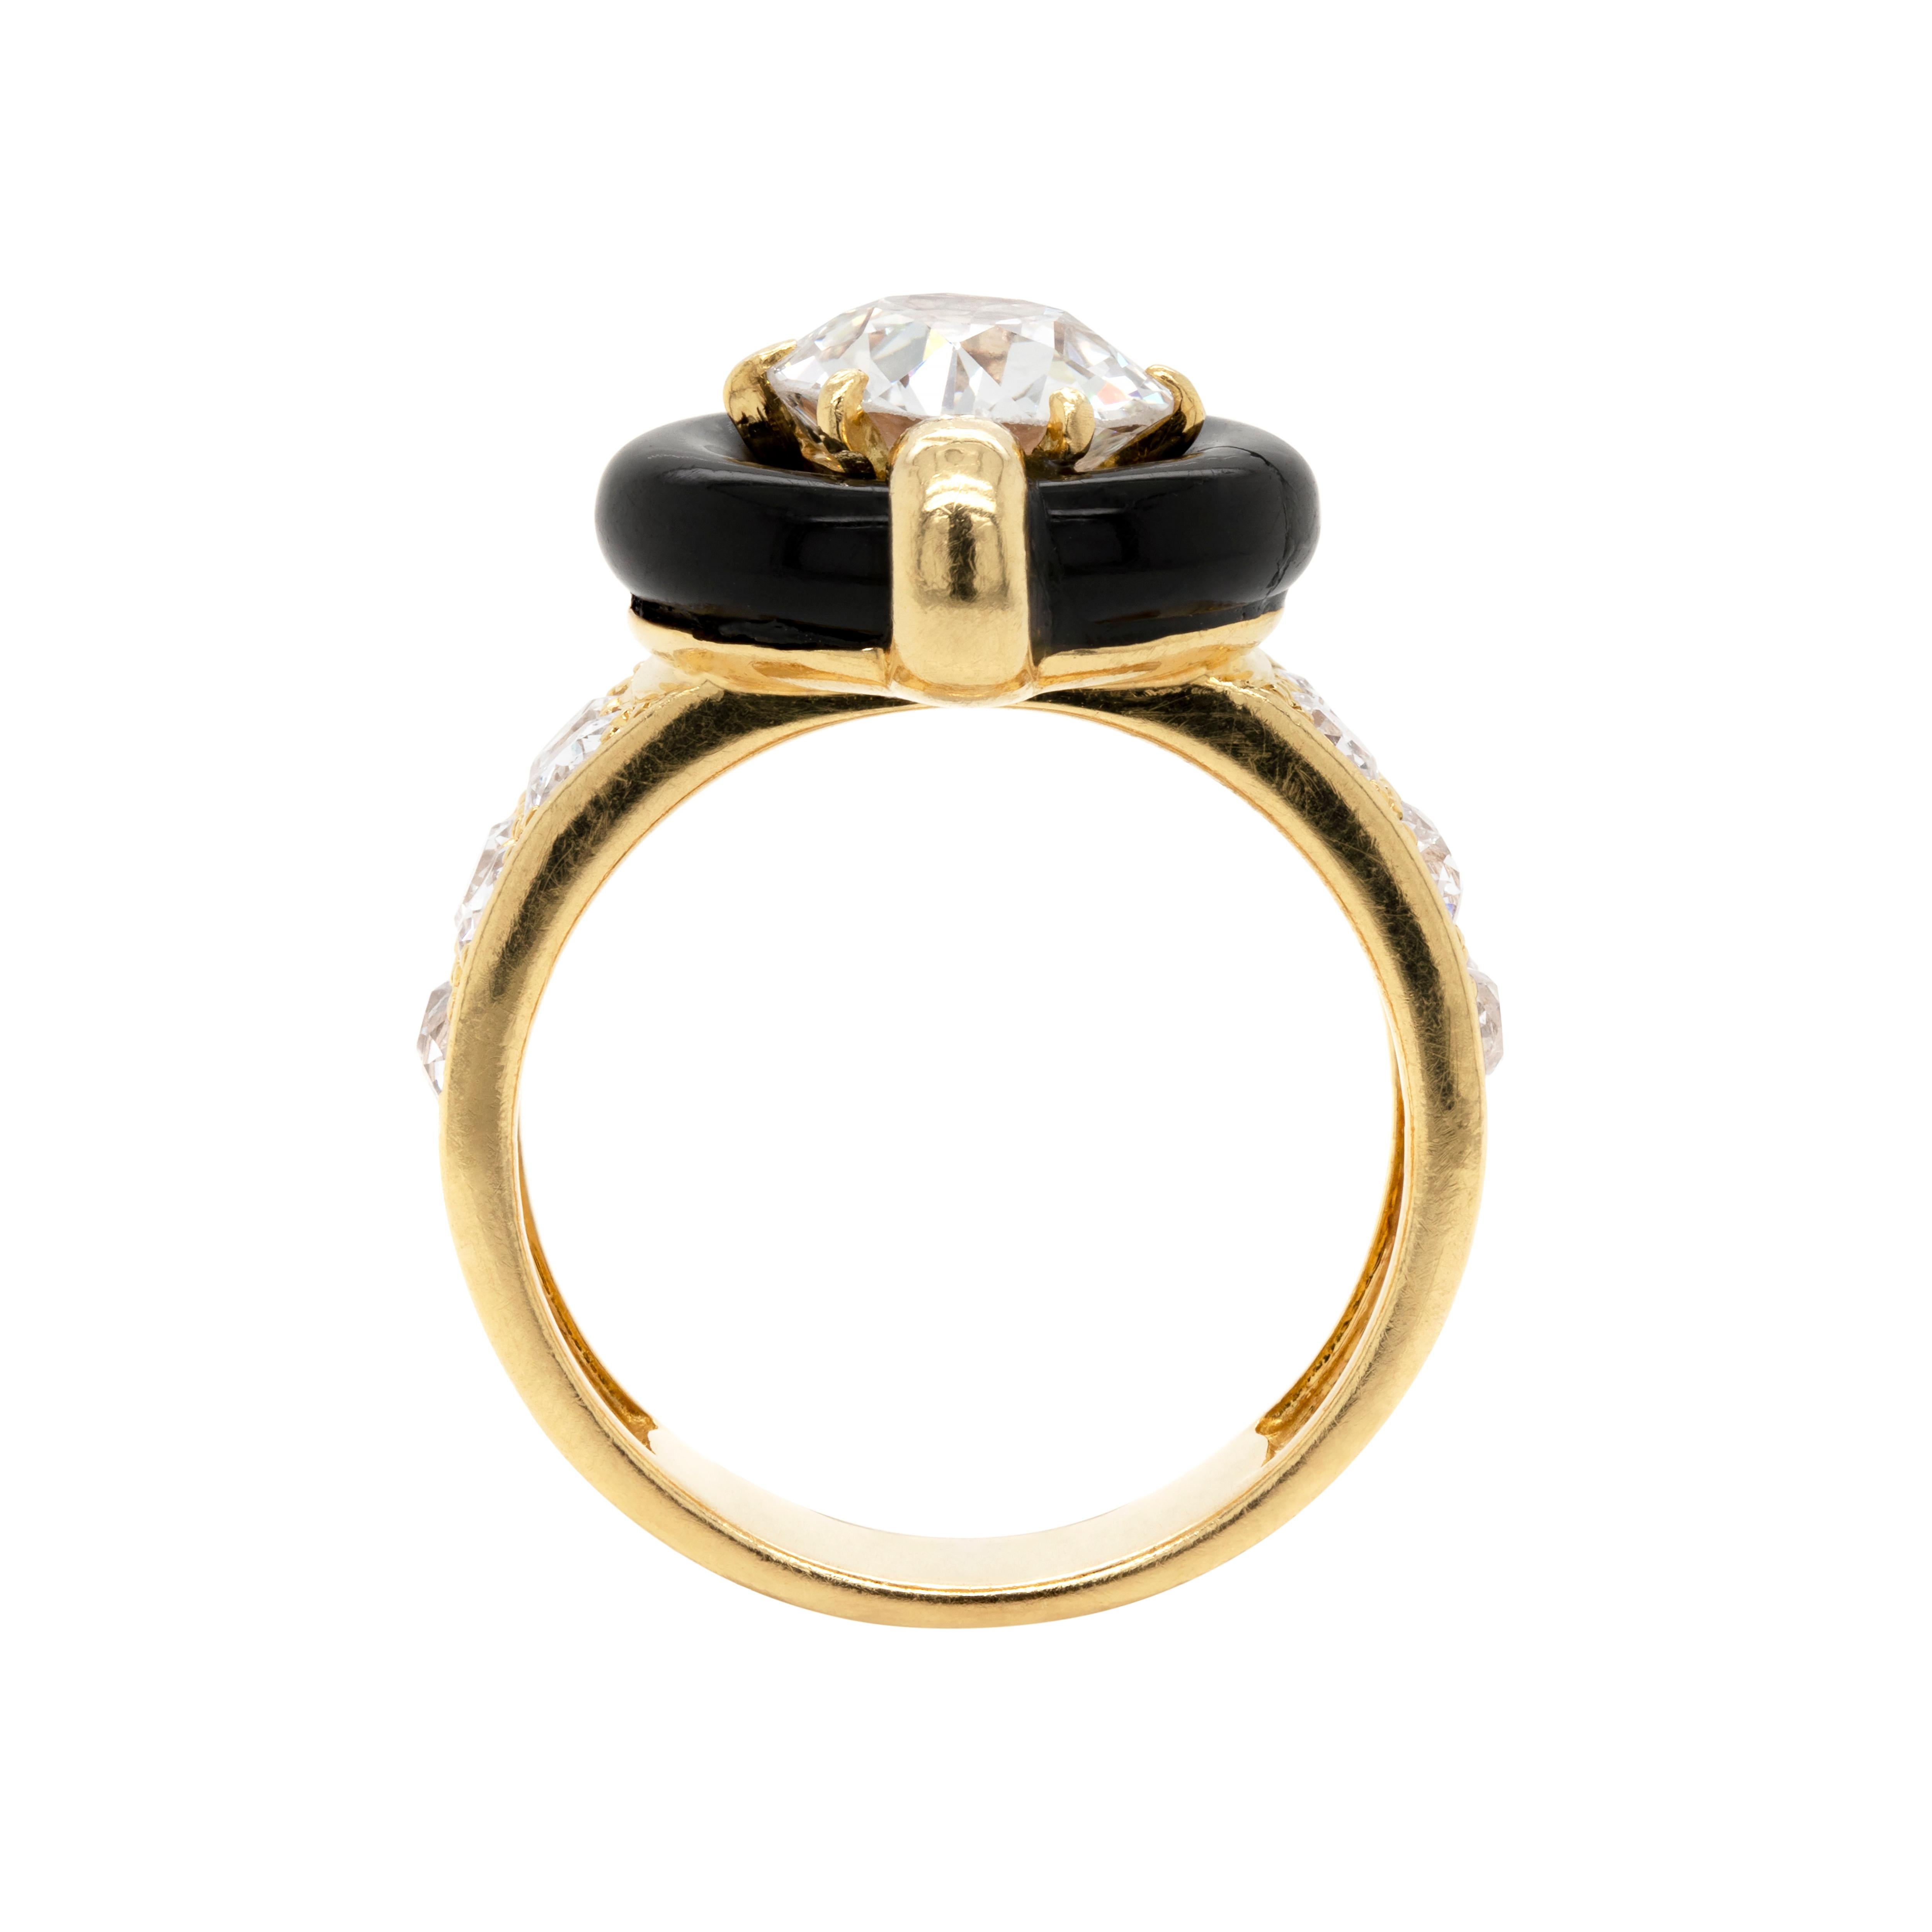 Retro Vintage Montres Mauboussin 1.84ct Old Cut Diamond and Onyx 18K Gold Ring, French For Sale